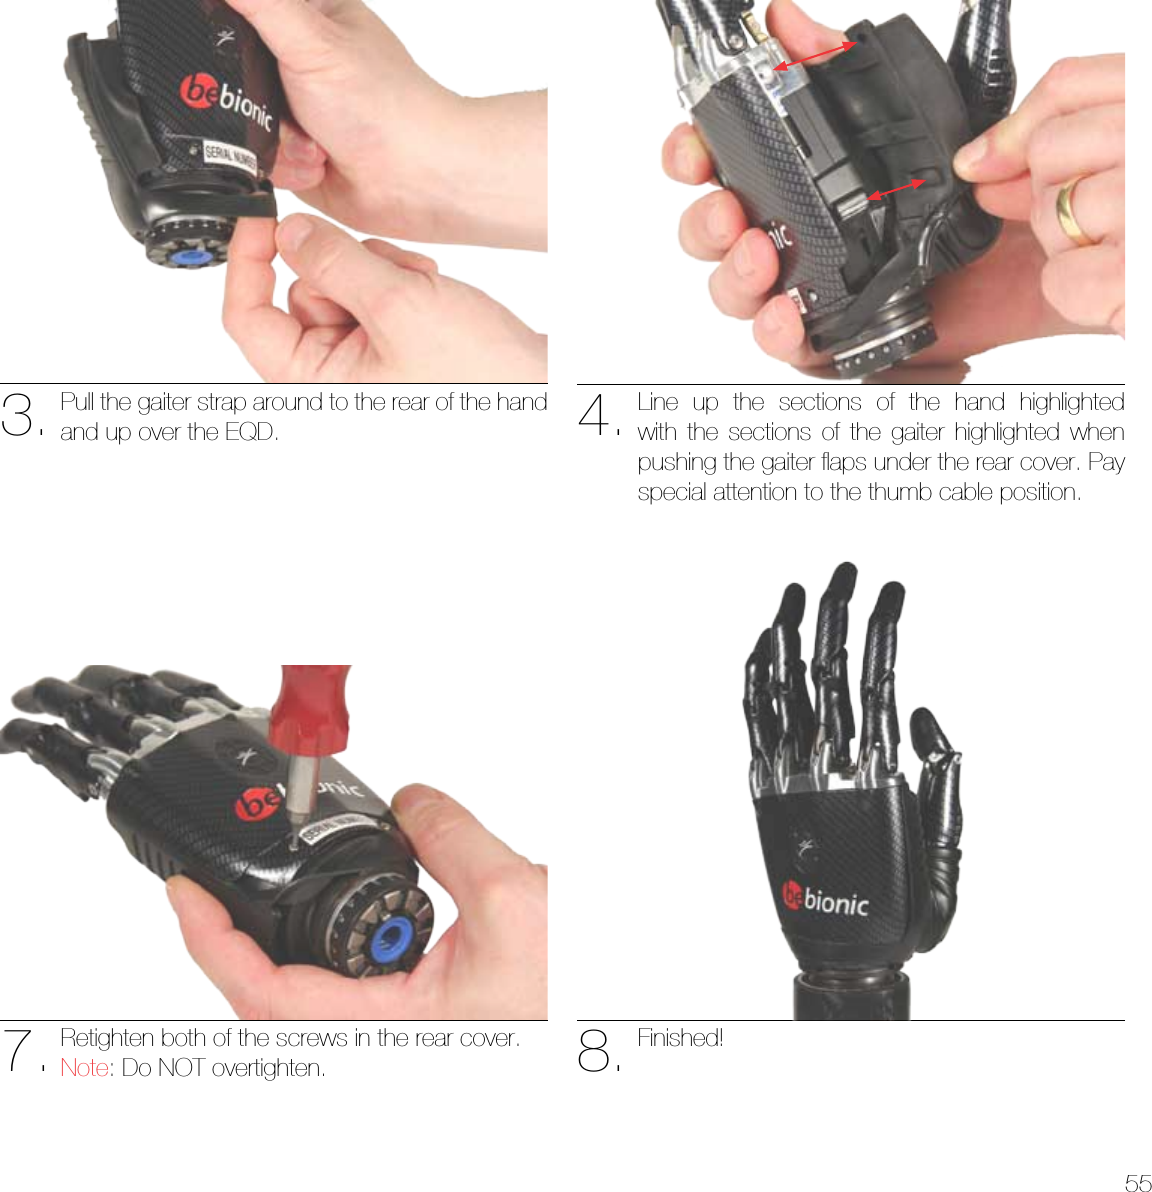 553. 4.7. 8.Pull the gaiter strap around to the rear of the hand and up over the EQD.Line up the sections of the hand highlighted with the sections of the gaiter highlighted when pushing the gaiter ﬂaps under the rear cover. Pay special attention to the thumb cable position.Retighten both of the screws in the rear cover.Note: Do NOT overtighten.Finished!